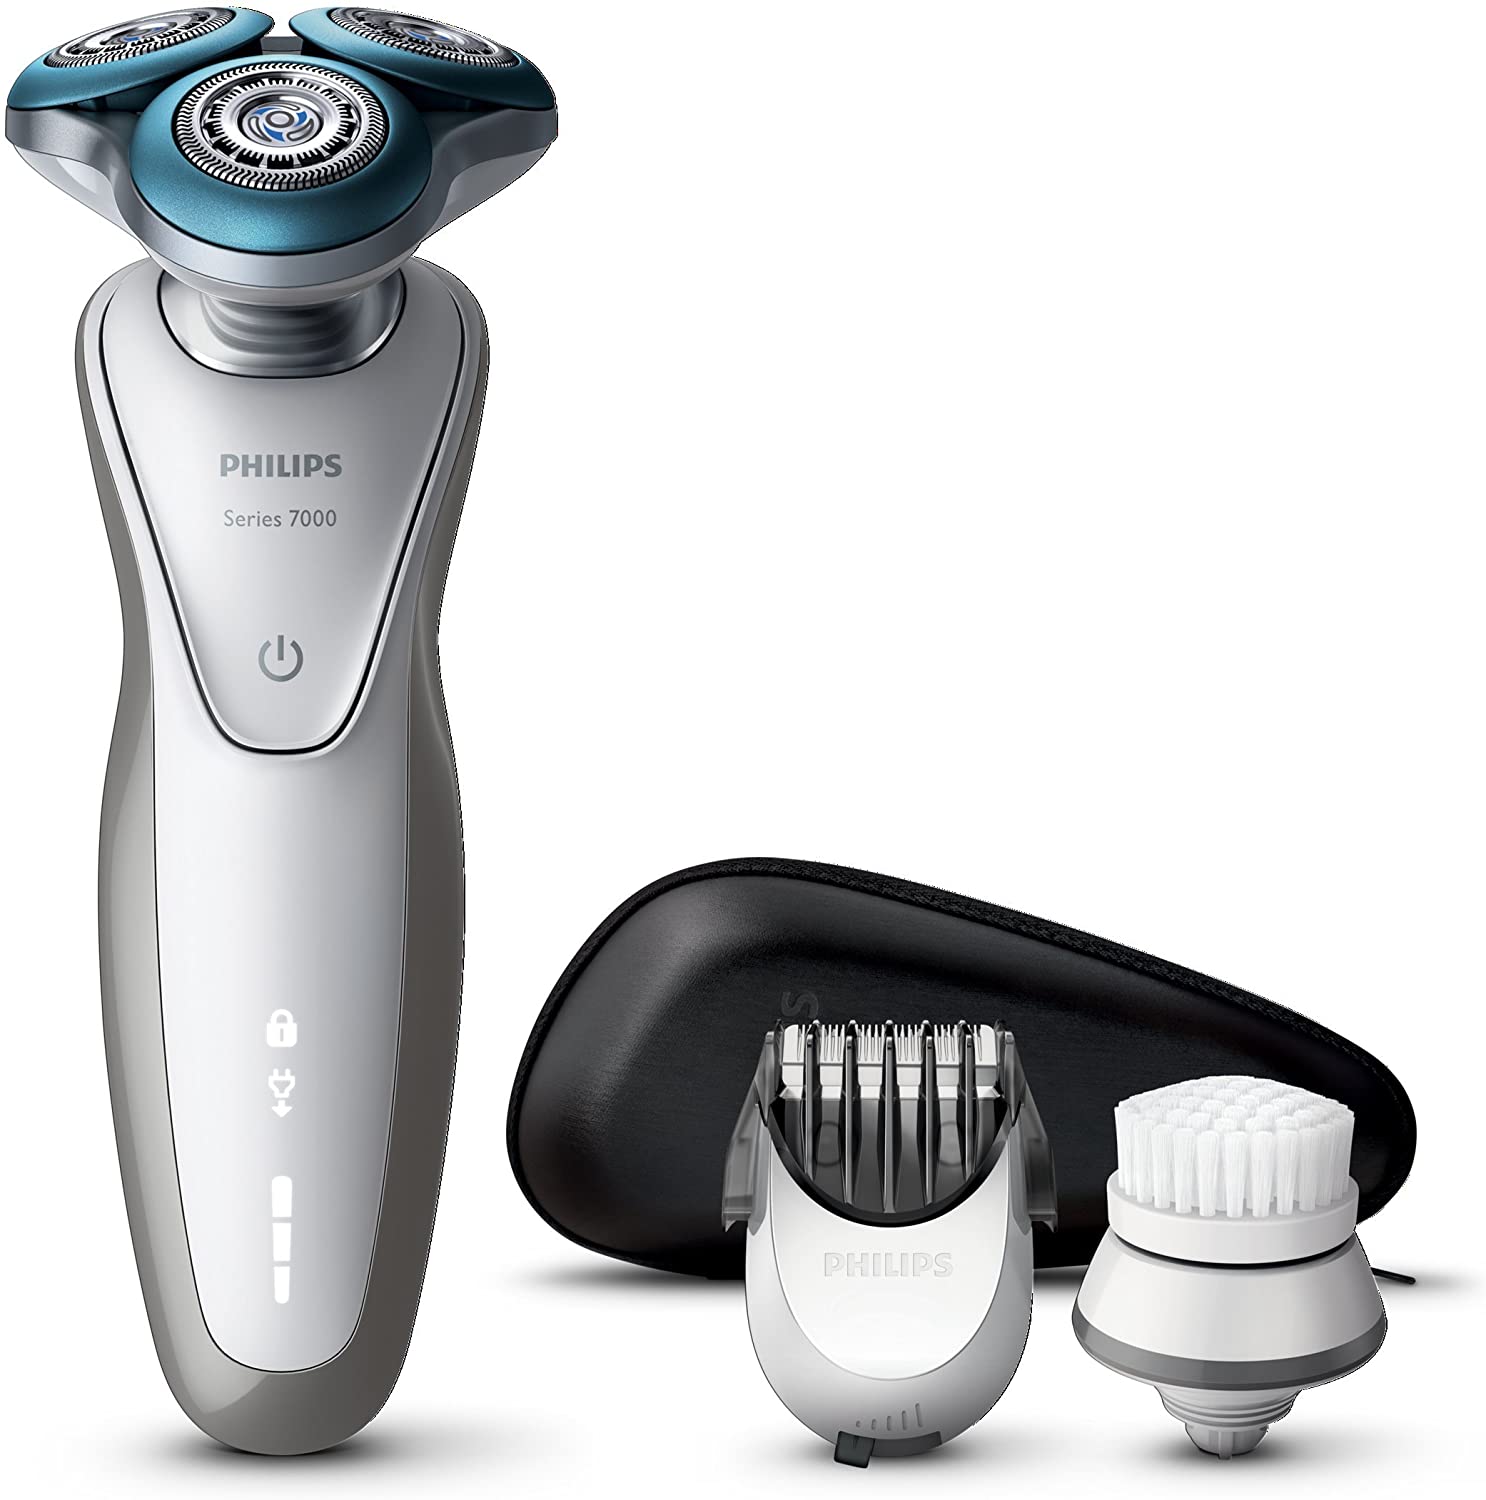 Philips S7530 Series 7000 Wet and Dry Men's Electric Shaver with Beard Trimmer and Exfoliation Brush